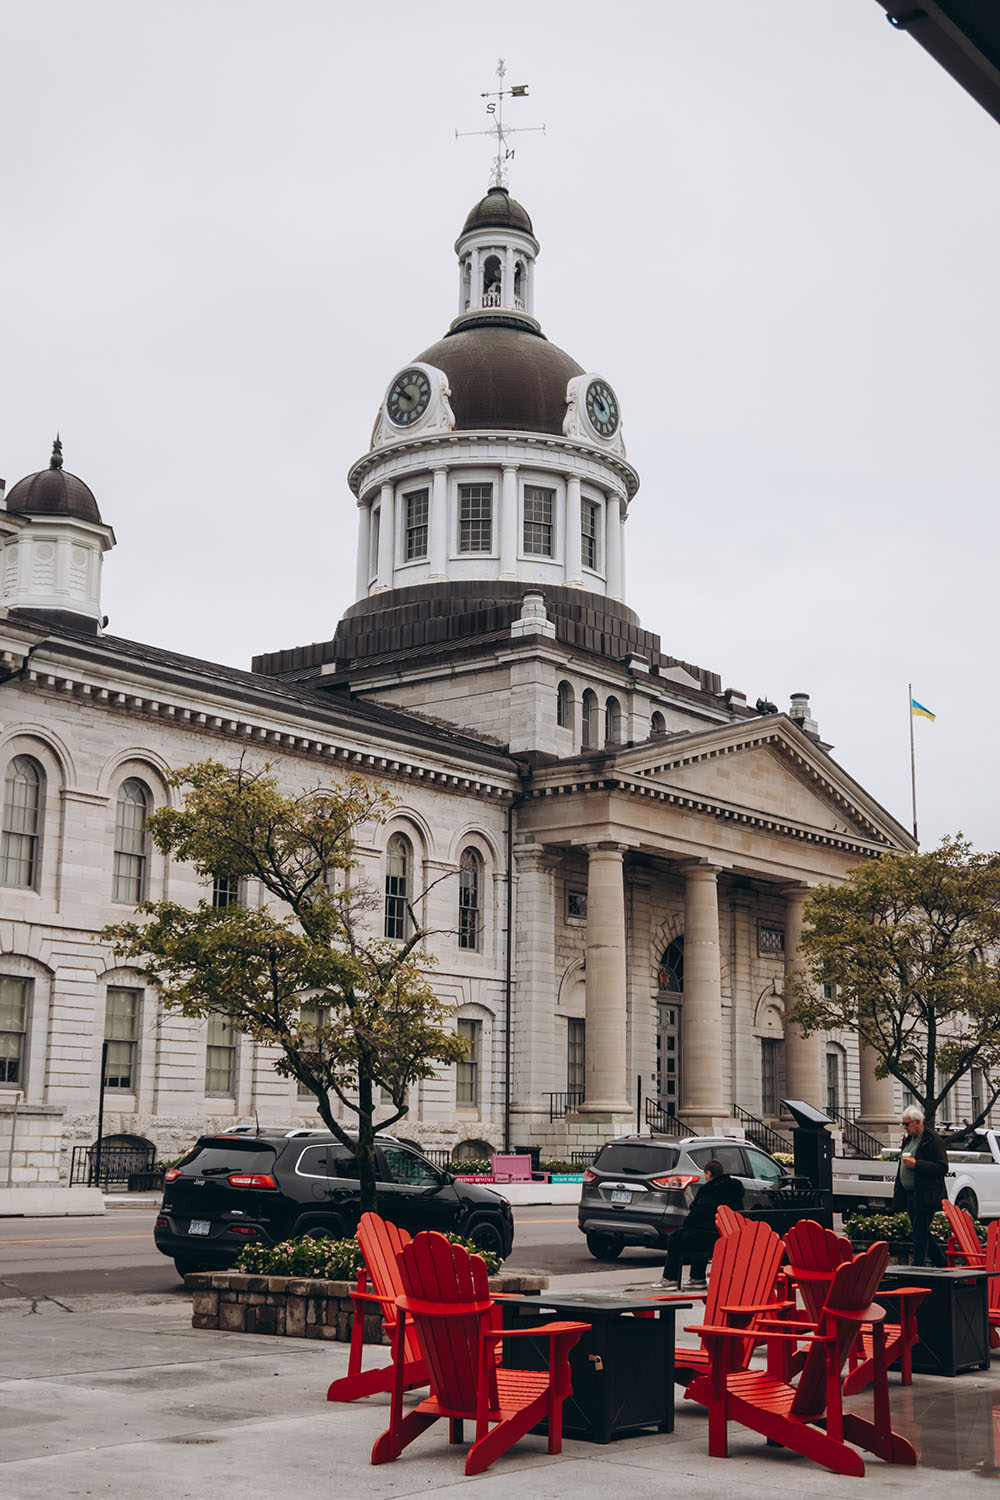 Planning a trip to Kingston soon with the goal of taking some amazing pictures while you're there? This guide to the most instagrammable places in Kingston Ontario is for you! From the gorgeous old architecture and historic buildings, European influence you’ll find all lover, and the incredibly unique alleys and cafes, there’s more than enough places to snap your next instagram photo. If you’re planning a visit to Kingston soon you definitely don’t want to miss this guide to the best photo spots in Kingston. Pictured here: Kingston's City Hall